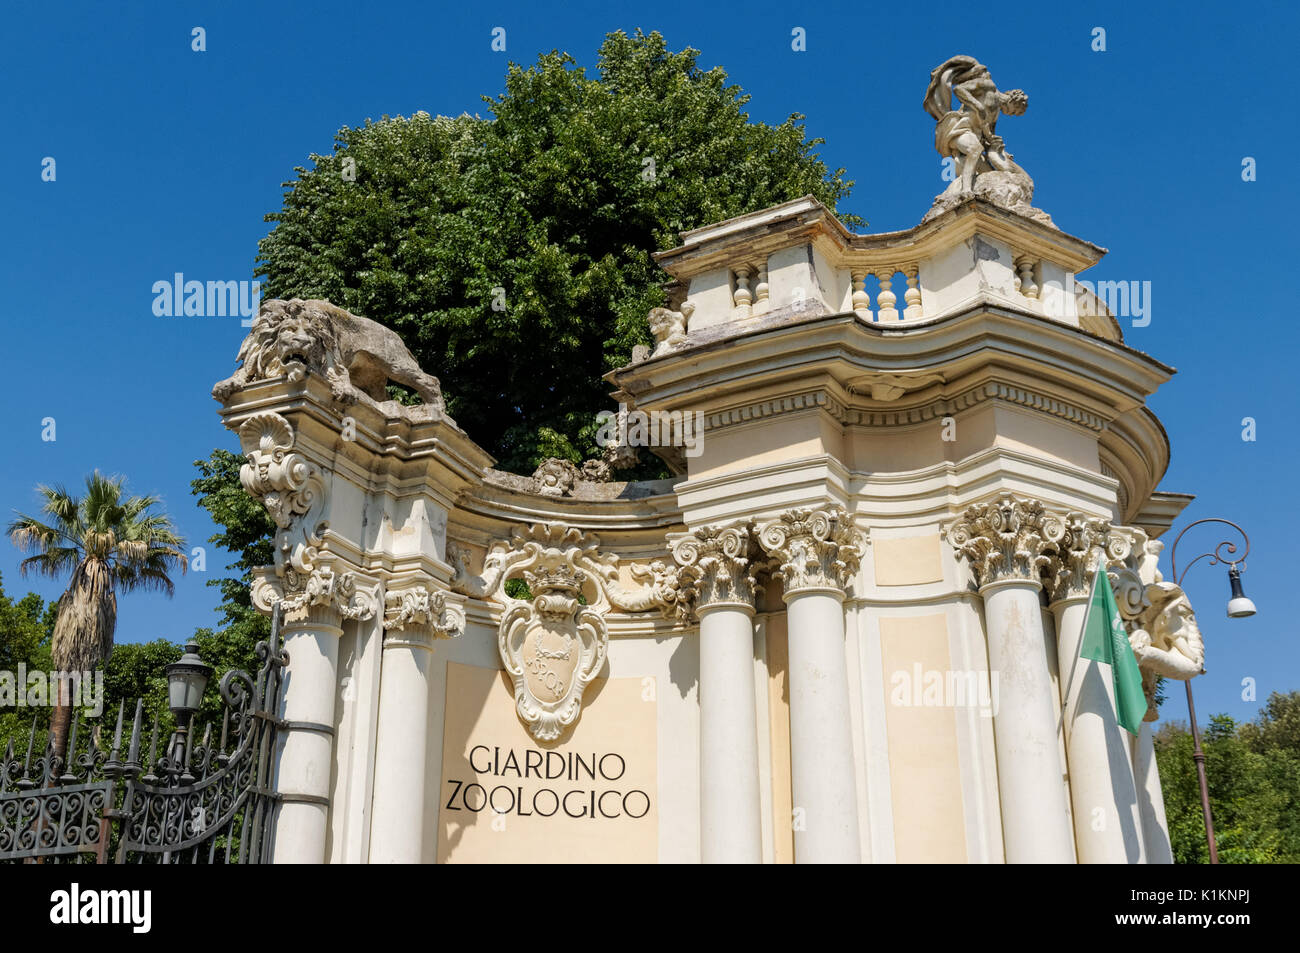 Entrance to Bioparco di Roma, zoo in Rome, Italy Stock Photo